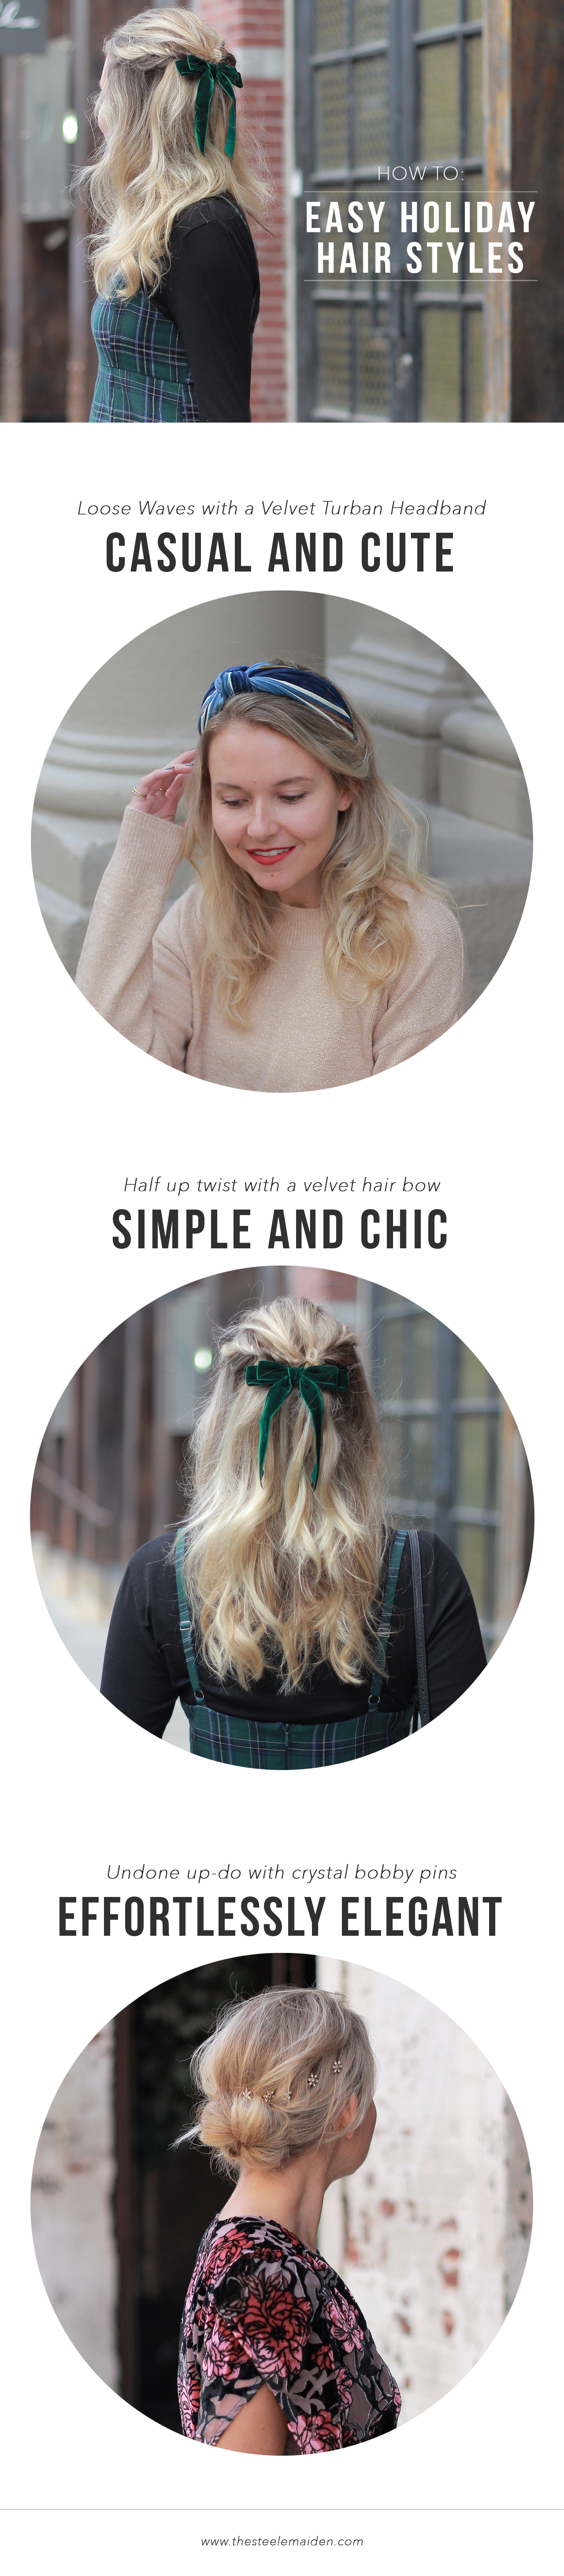 The Steele Maiden: How to: Easy Holiday Hair Style with Hair Accessories